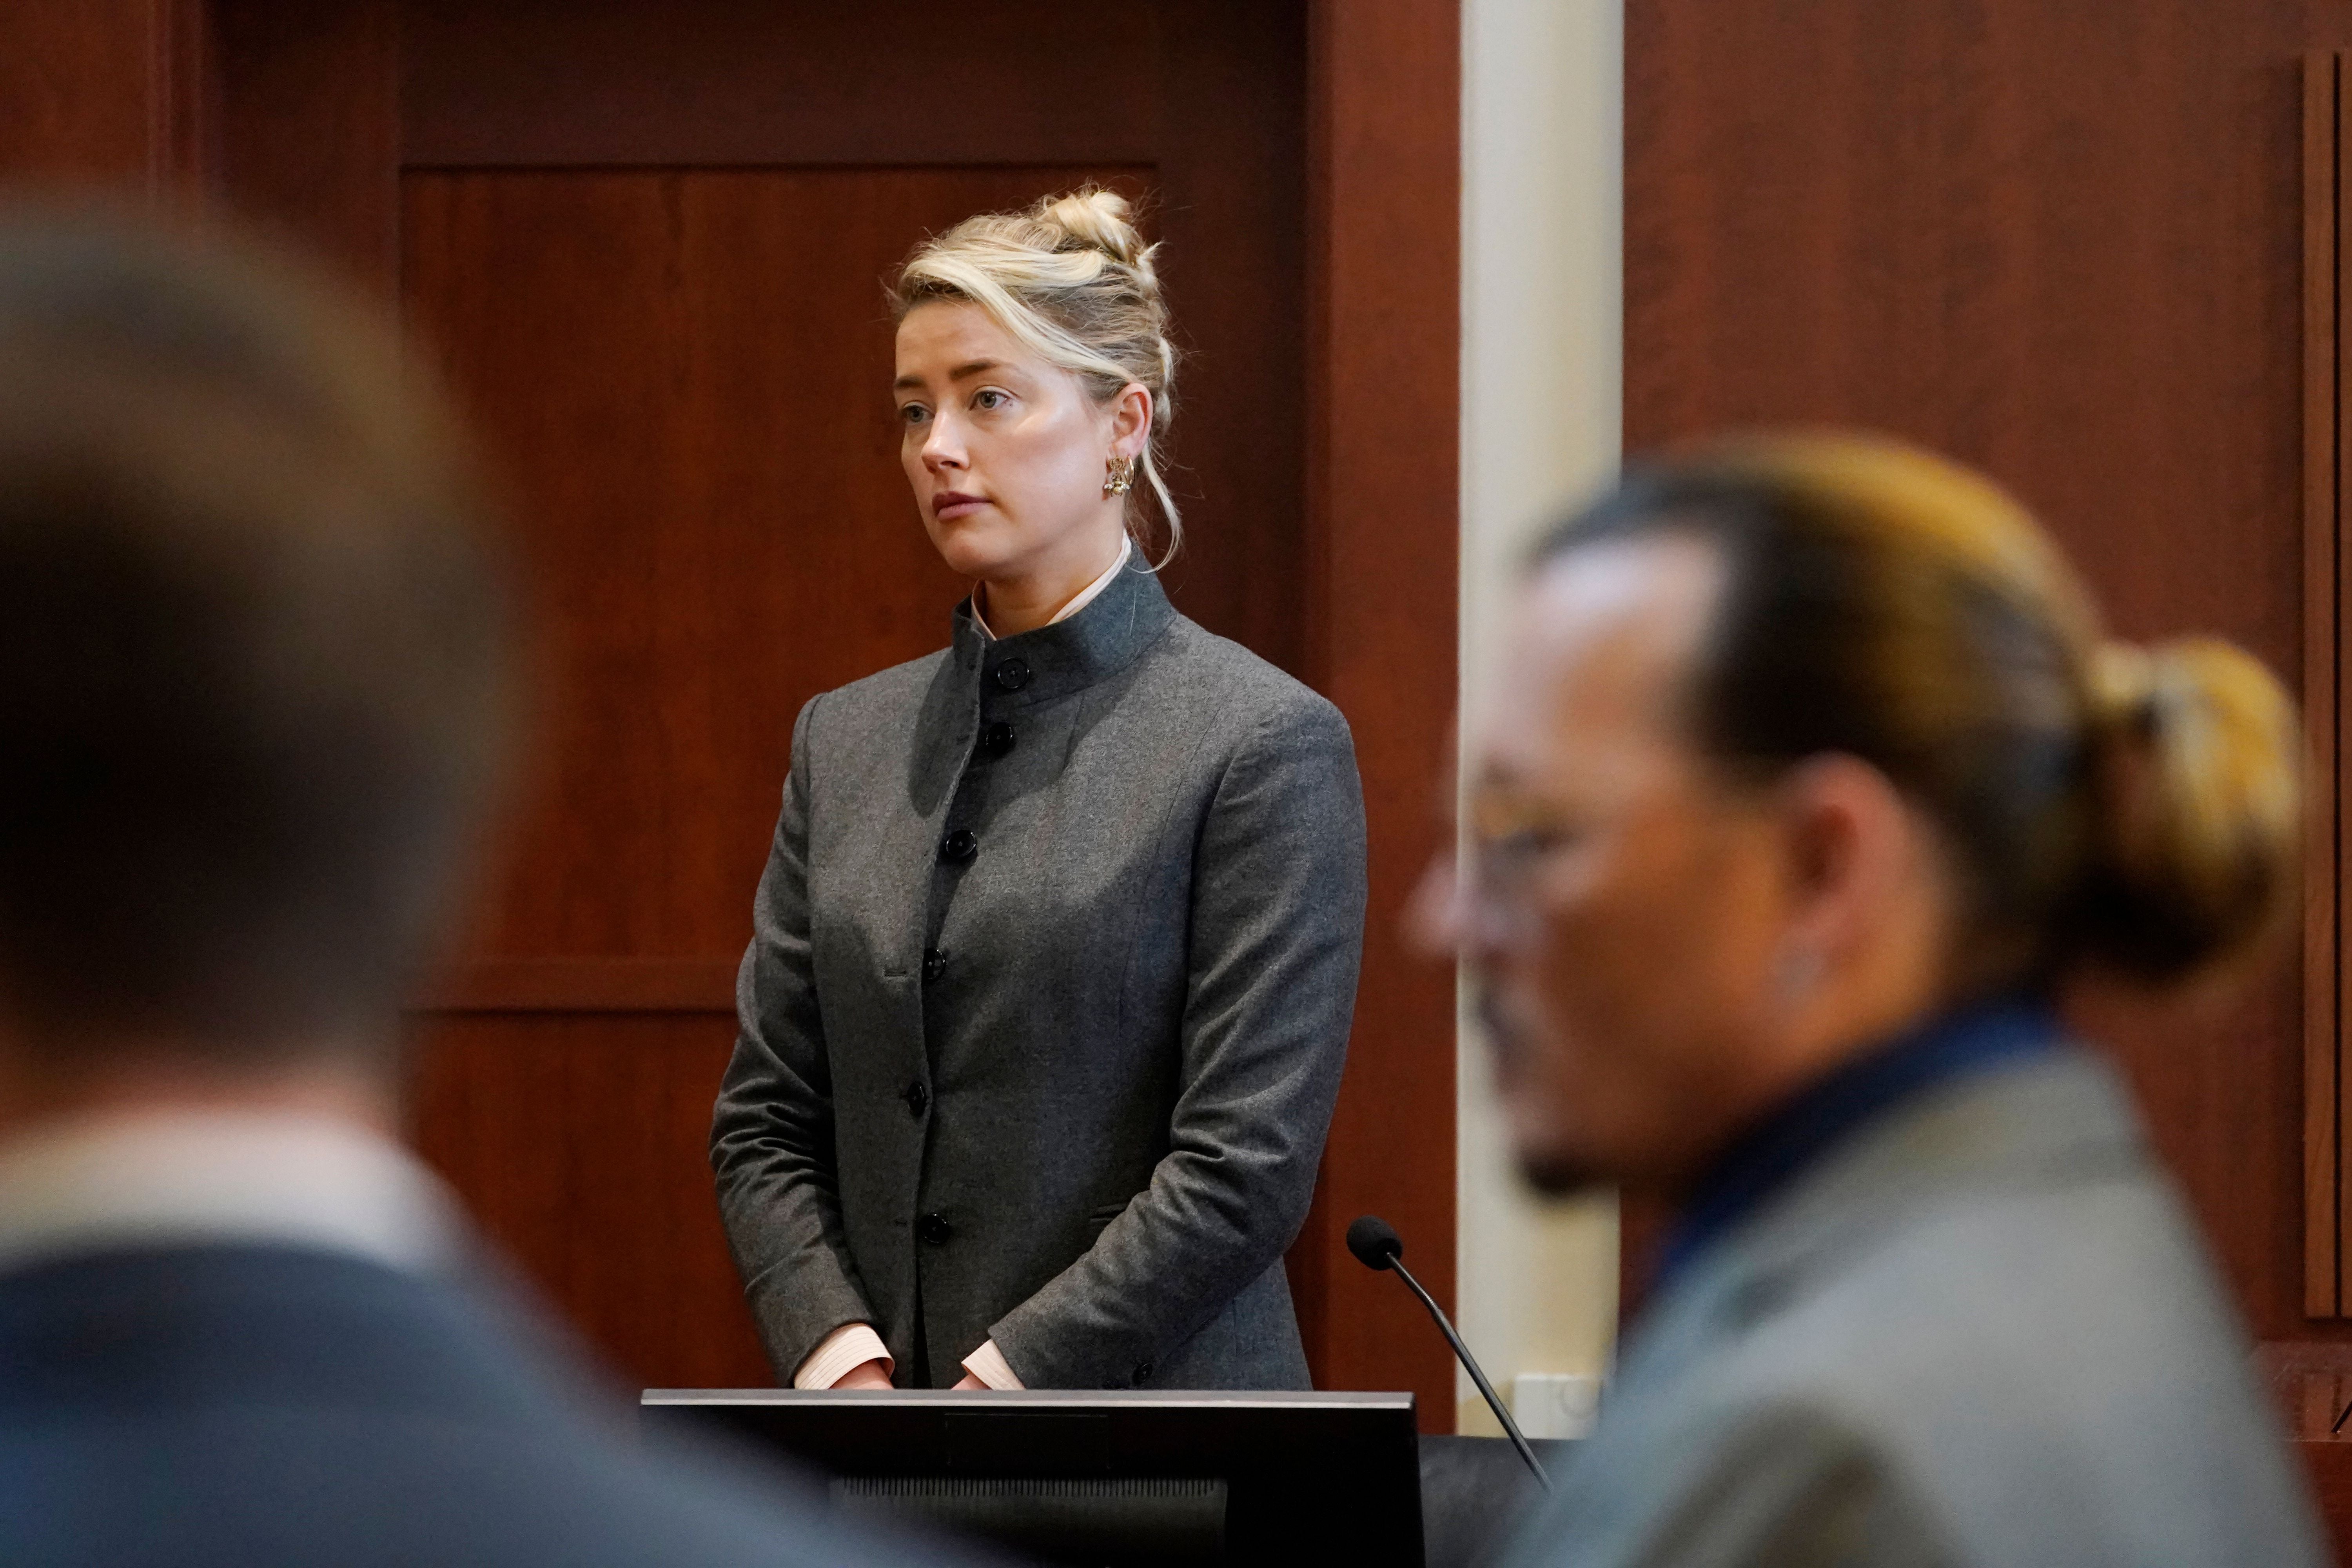 <p>Twitter and TikTok have been inundated with memes and lip-syncs mocking Heard’s testimony about the alleged violence and abuse she suffered at the hands of Depp - as well as seeking to prove she is lying</p>